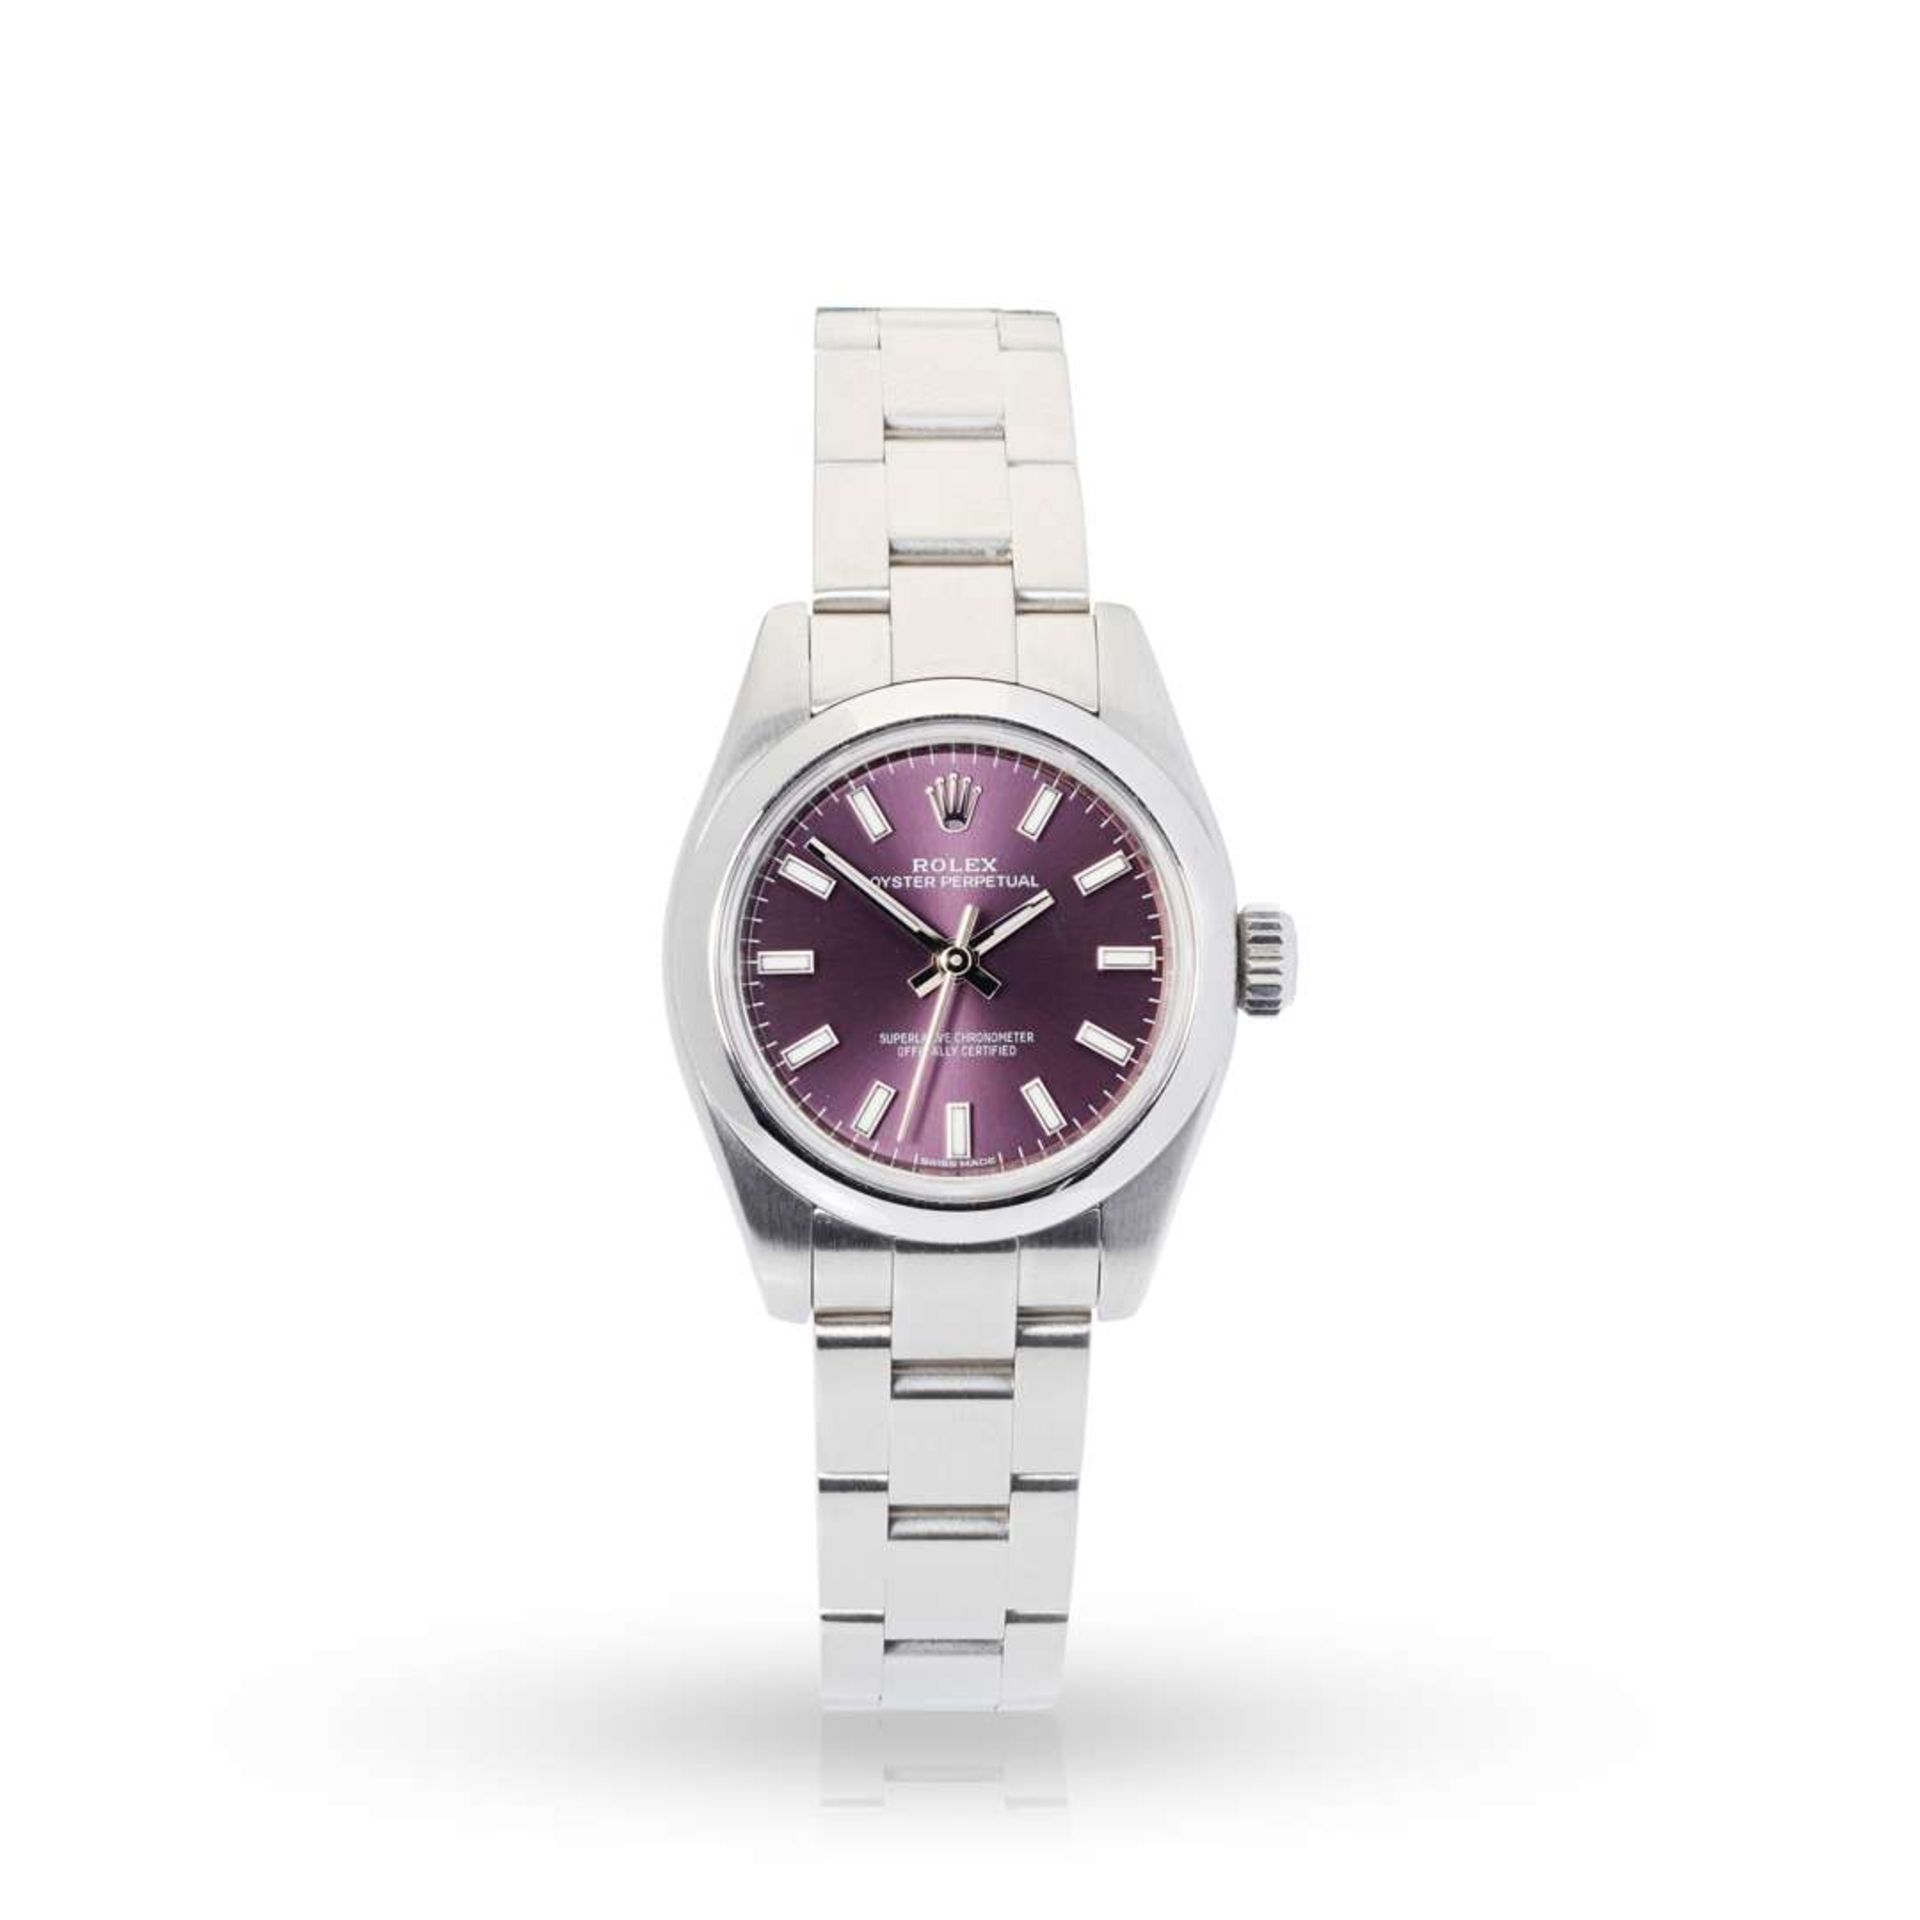 Rolex. A fine Ladies stainless steel automatic wristwatch with purple coloured dial